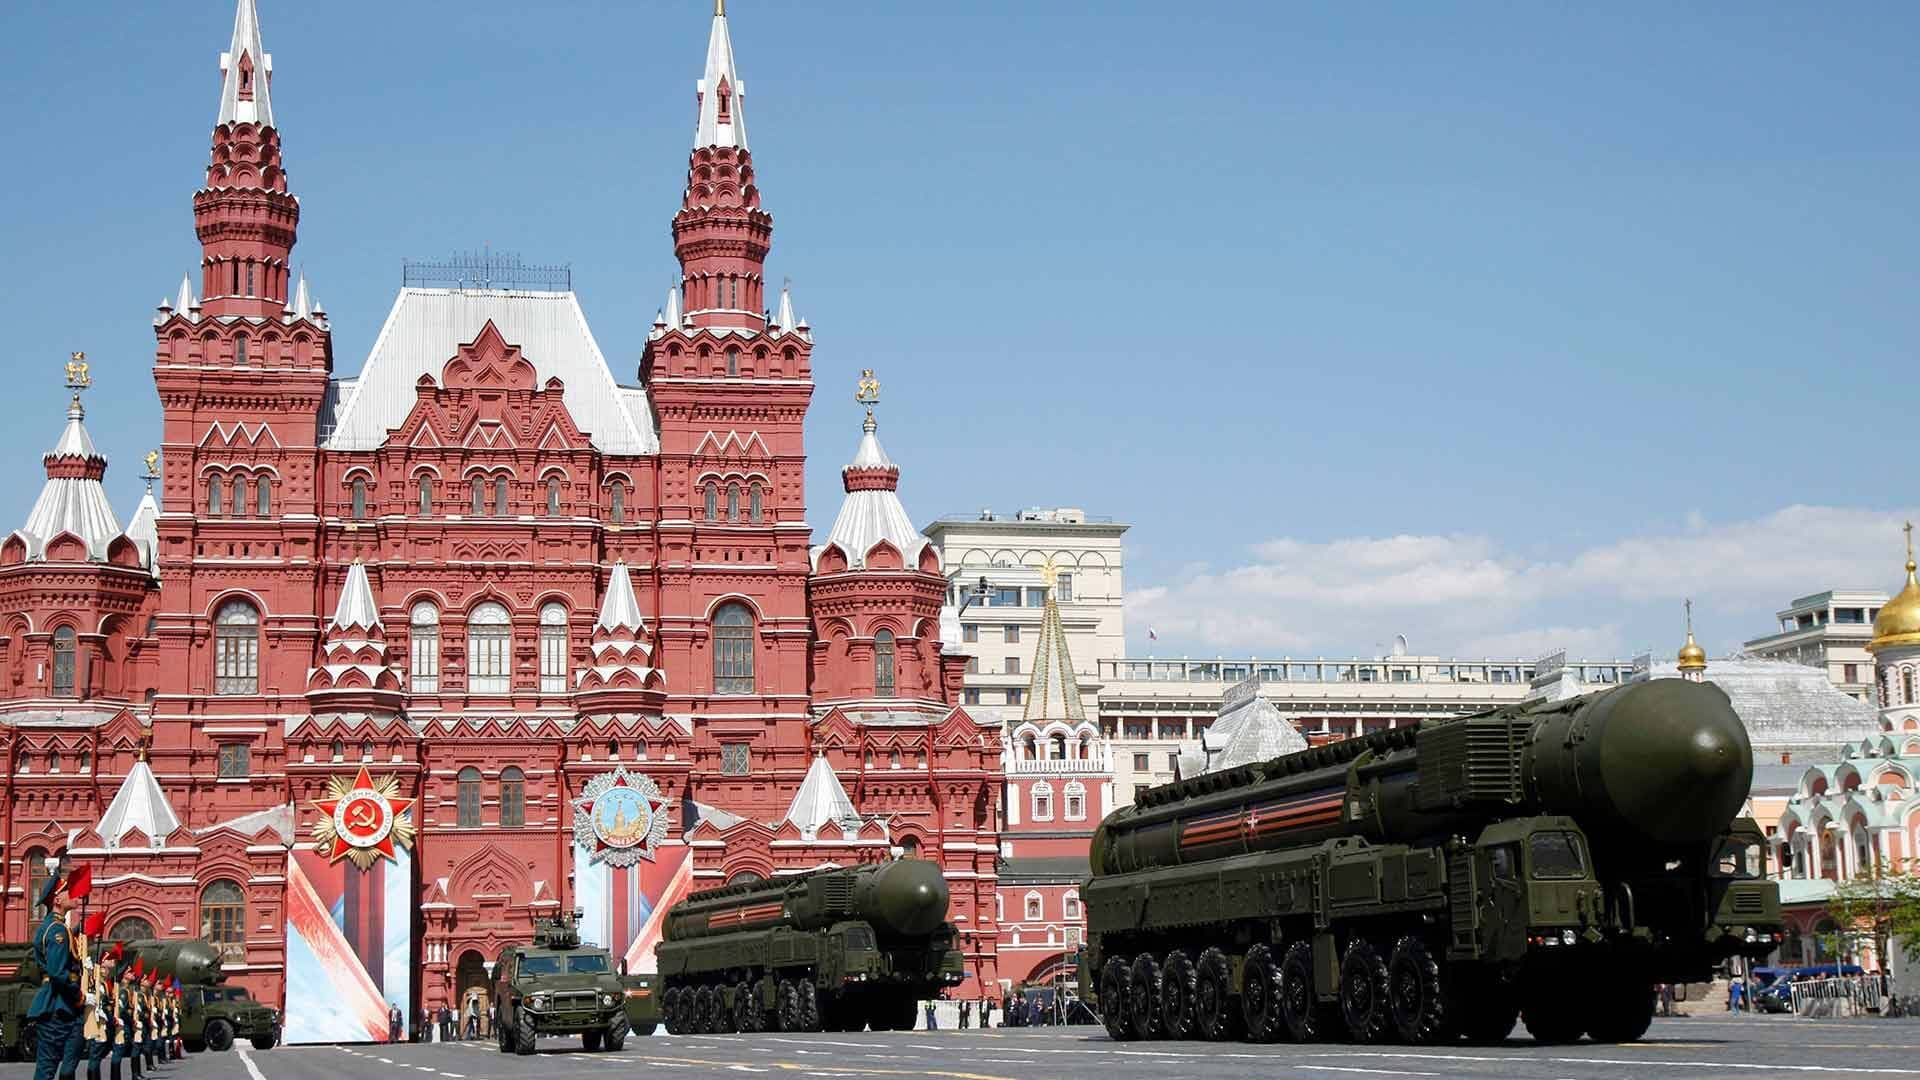 Russian ICBM missile launchers move during the Victory Day military parade marking 71 years after the victory in WWII in Red Square in Moscow, Russia, May 9, 2016.